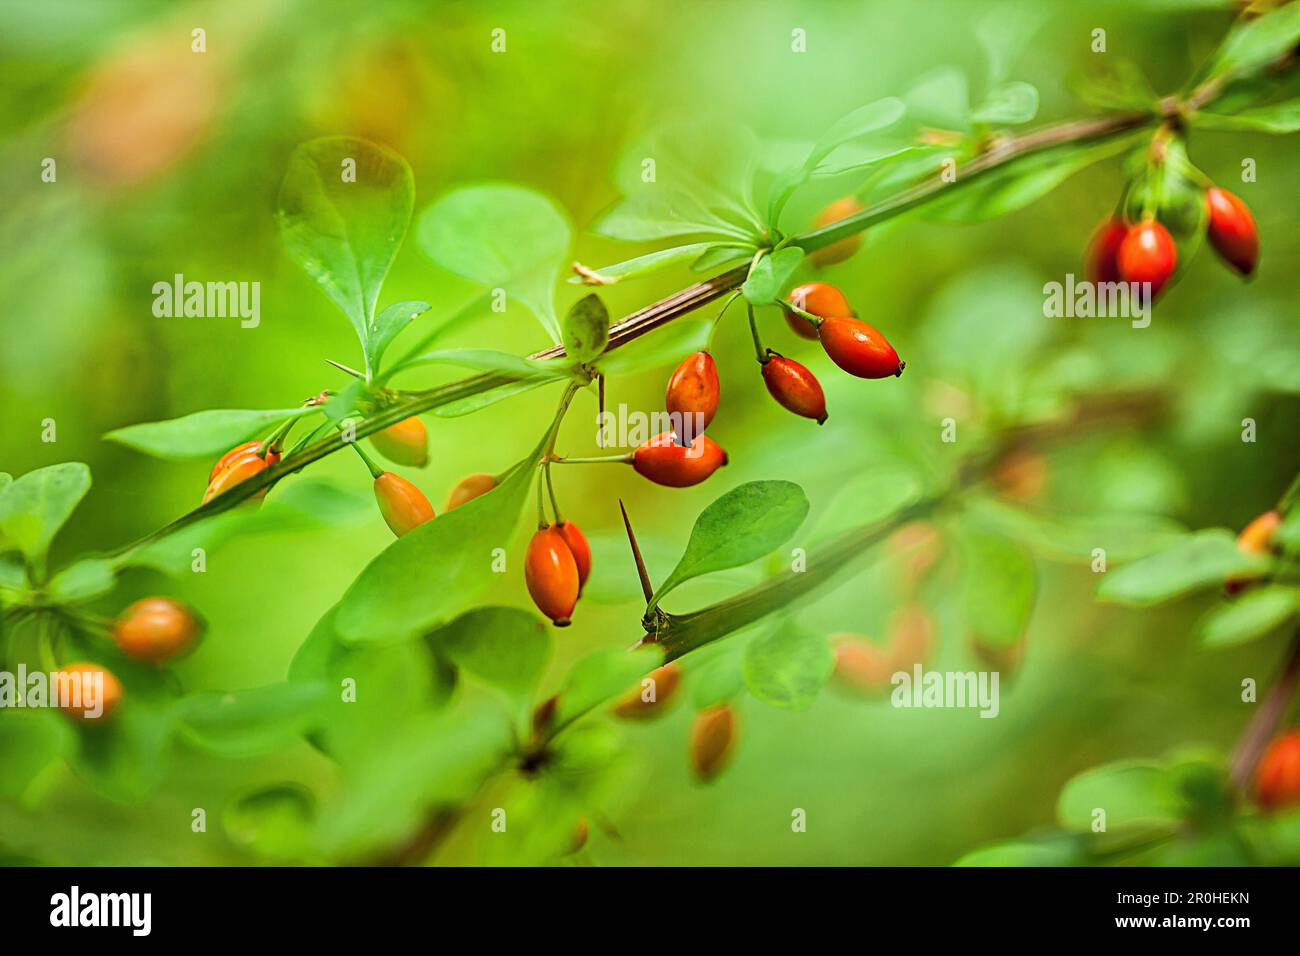 common barberry, European barberry (Berberis vulgaris), branch with fruits, Germany Stock Photo